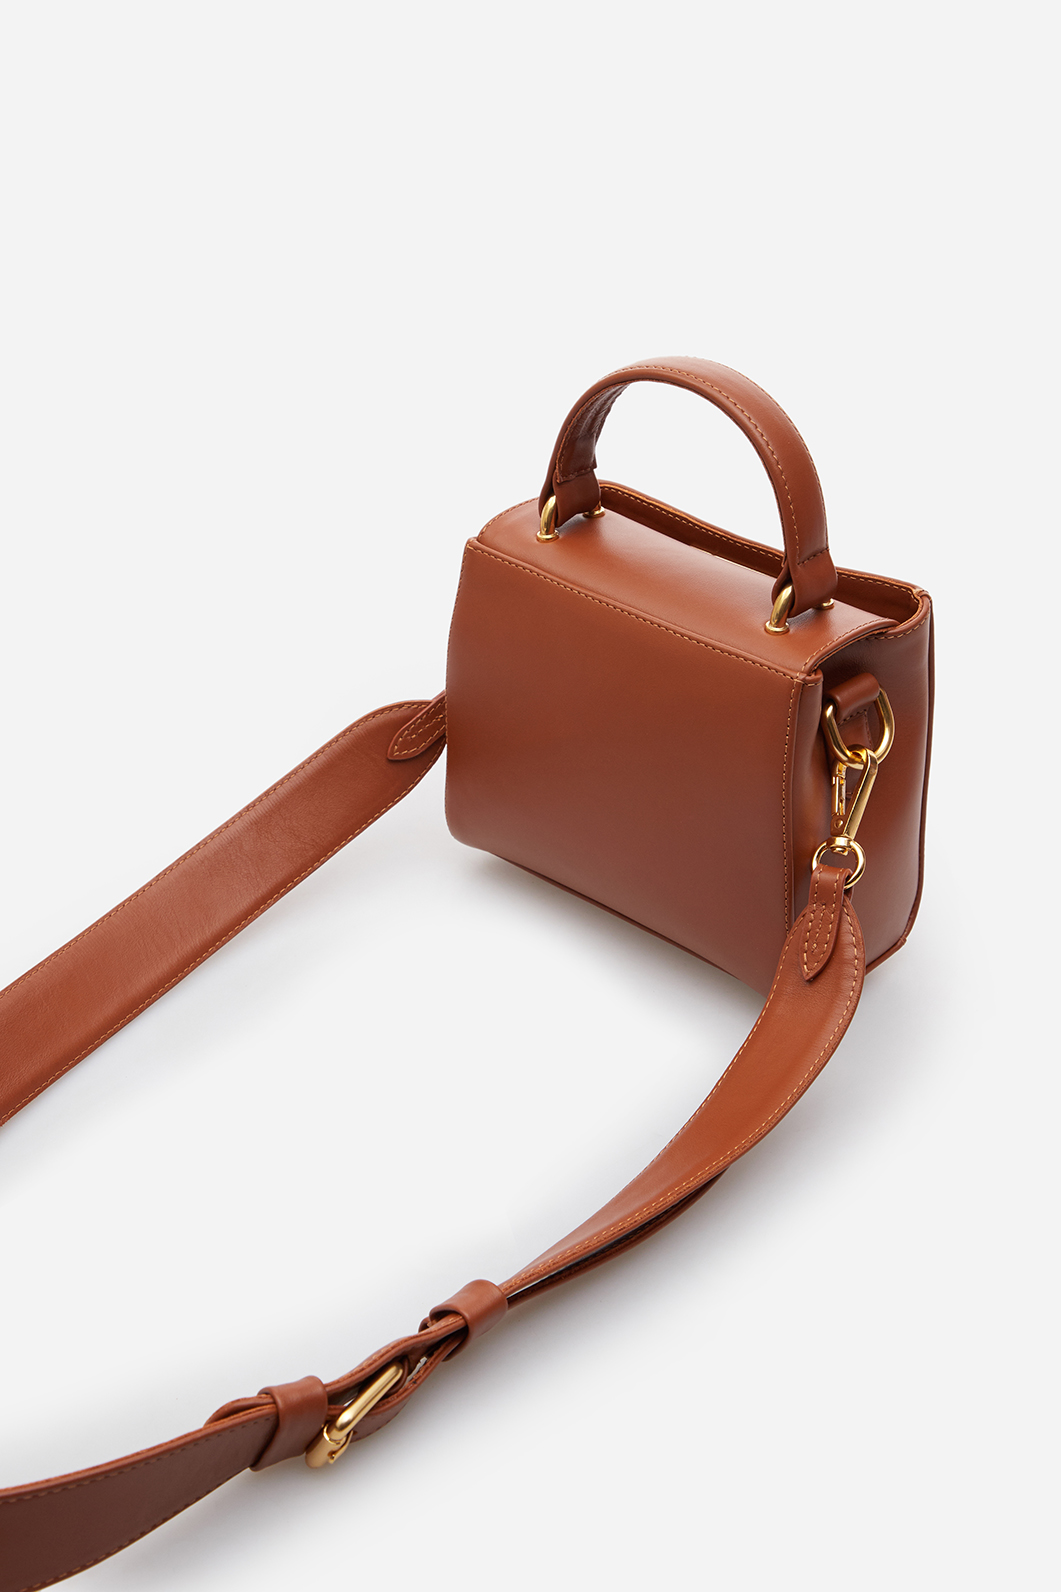 Erna micro RS caramel-colored leather
city bag /gold/